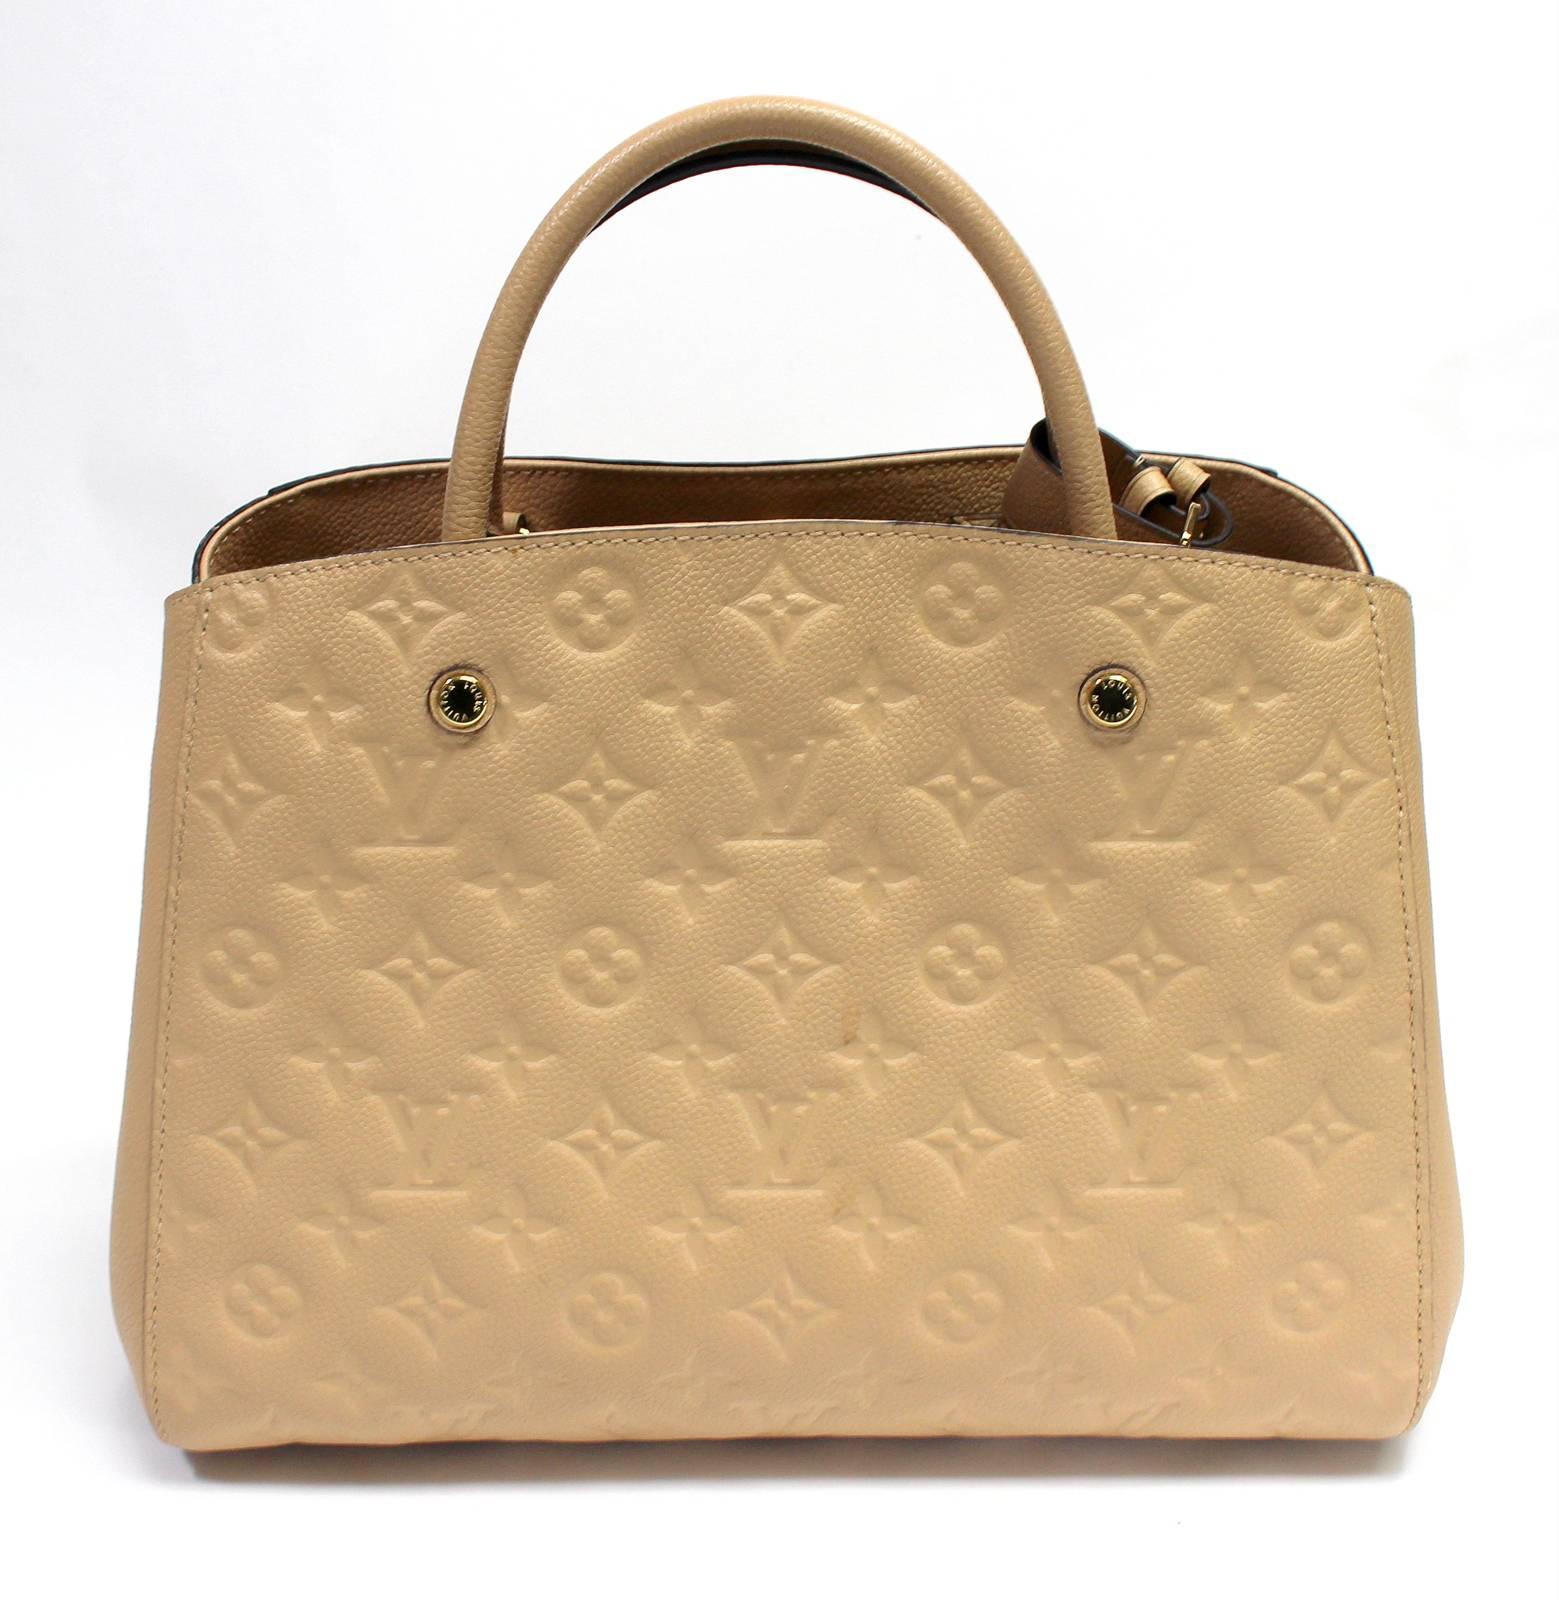 Louis Vuitton Dune Empreinte Montaigne MM- Near Pristine 
Retail $3,250.00
Textured monogram empreinte leather in year round neutral Dune color with gold hardware.  Central zippered compartment, double rolled leather handles and protective footed